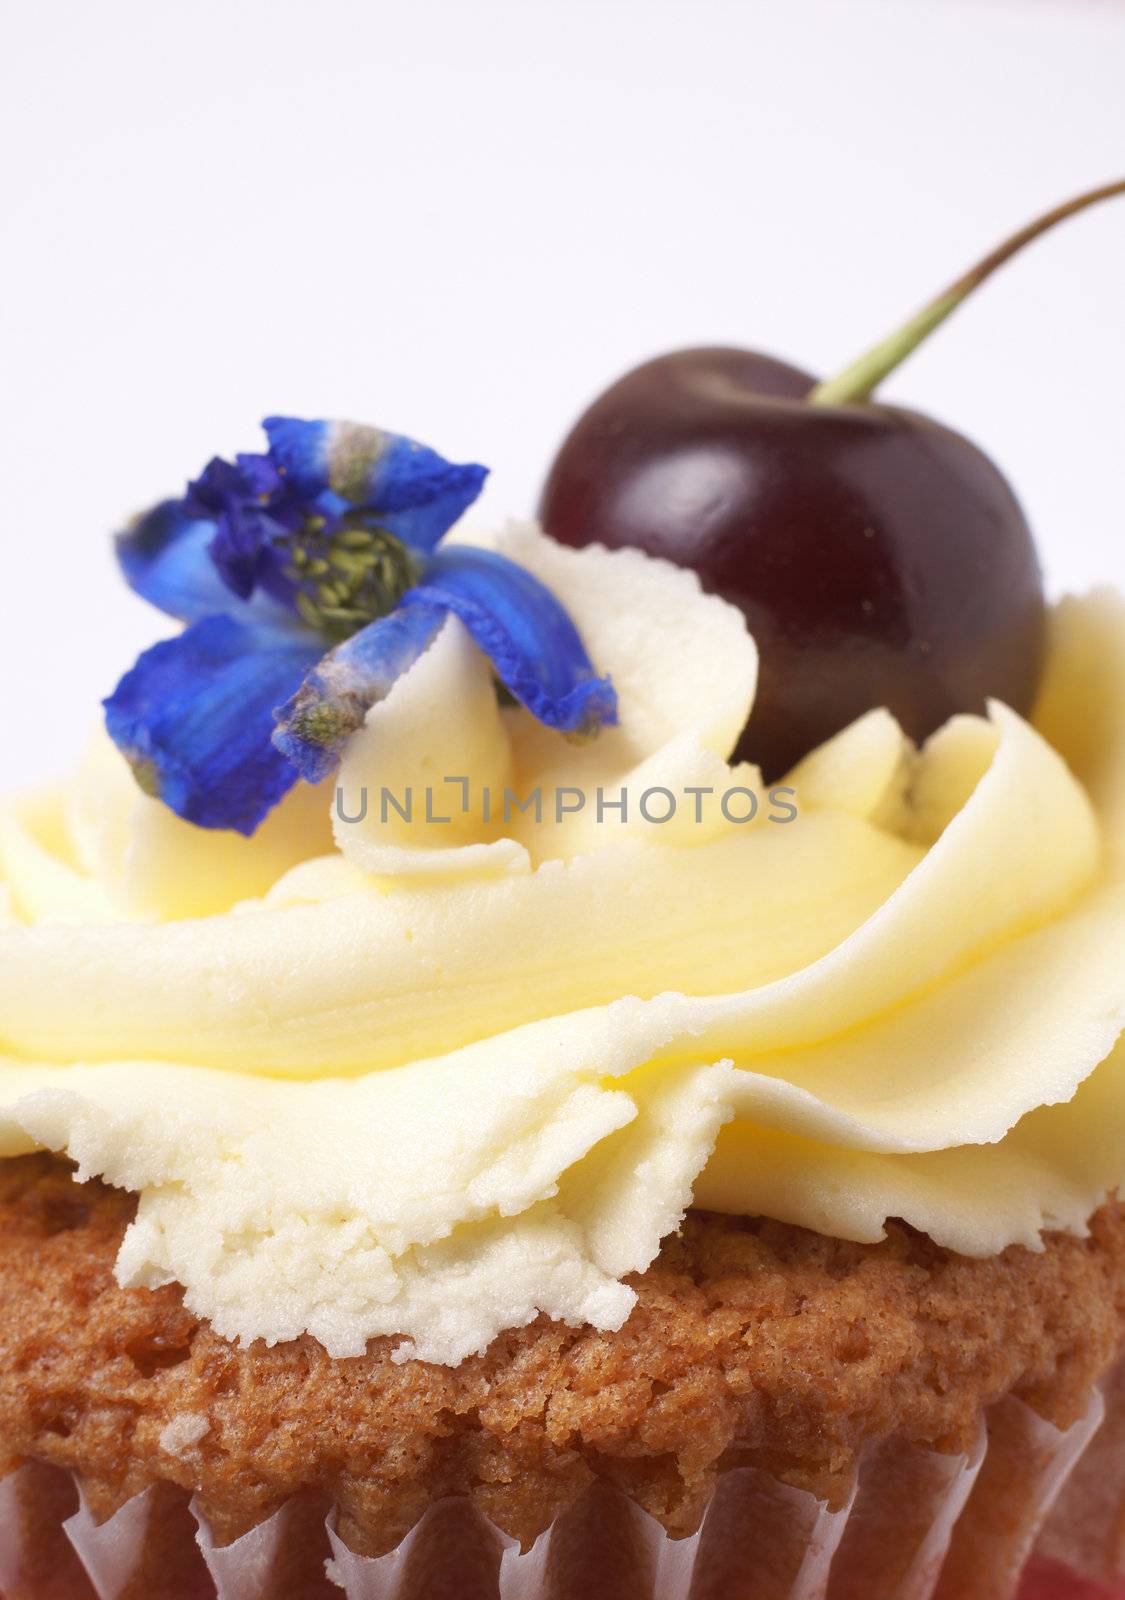 Miniature vanilla cupcake with icing, fresh cherry and blue flower on white background. Macro shot, shallow depth of field